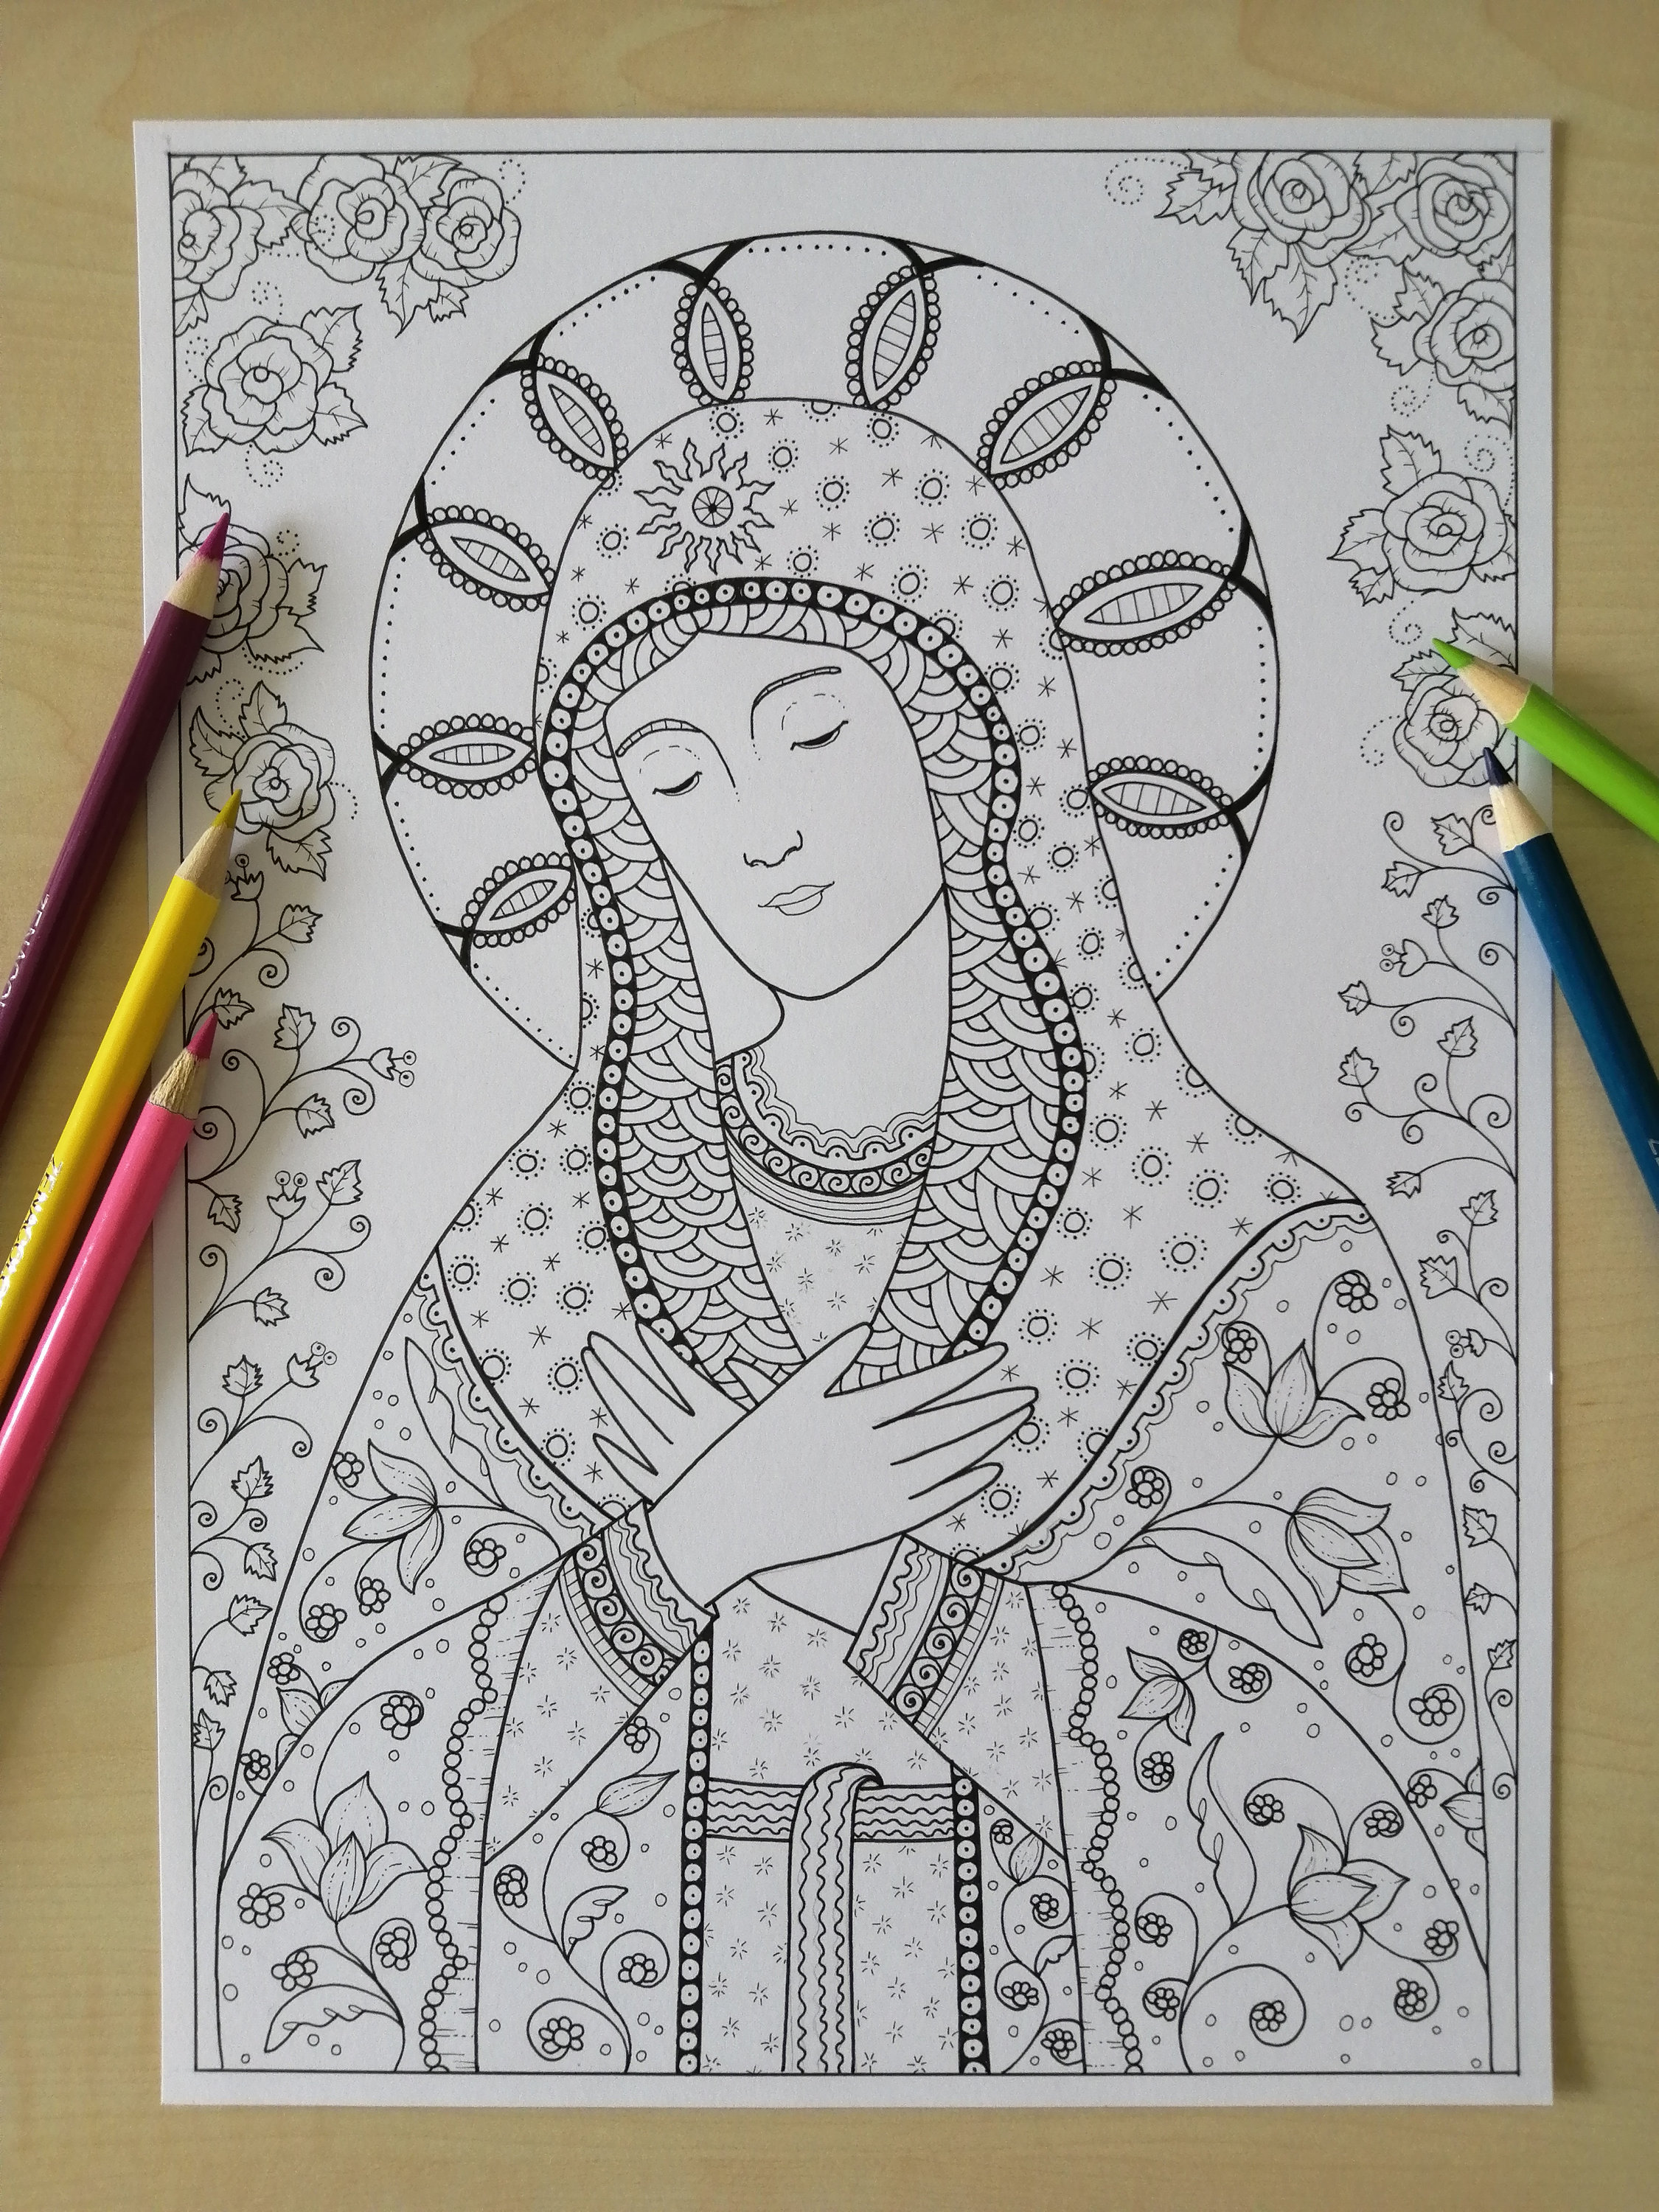 Virgin mary coloring page for adults jpg printable zentangle instant download catholic art bibartworkshop